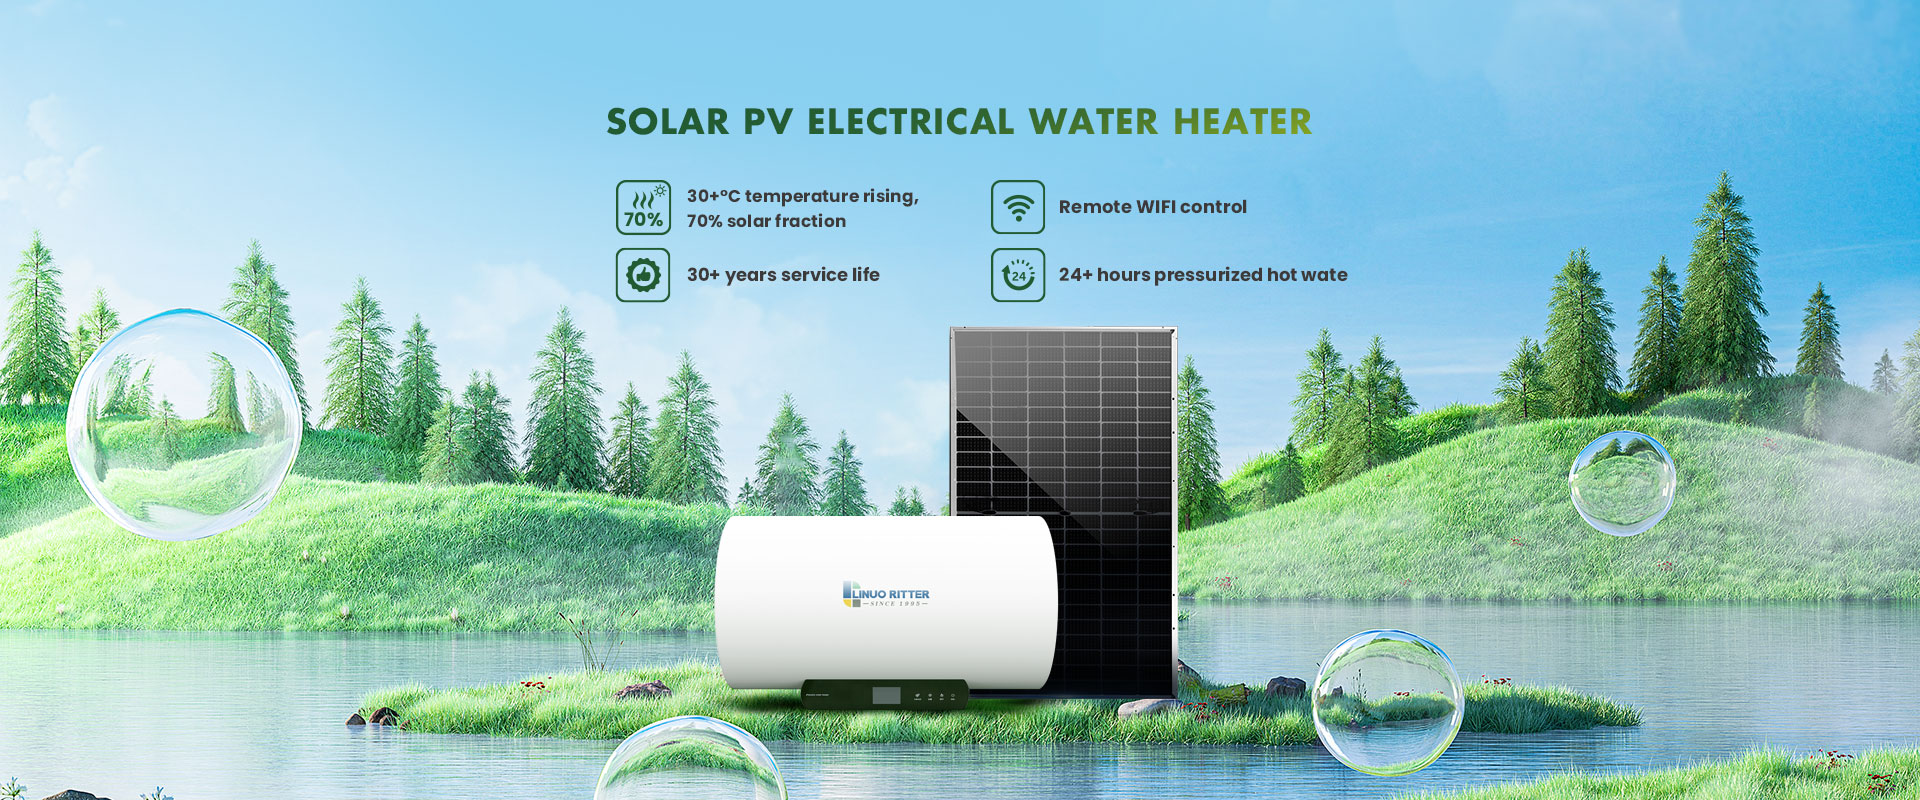 solar pv electrical water heater